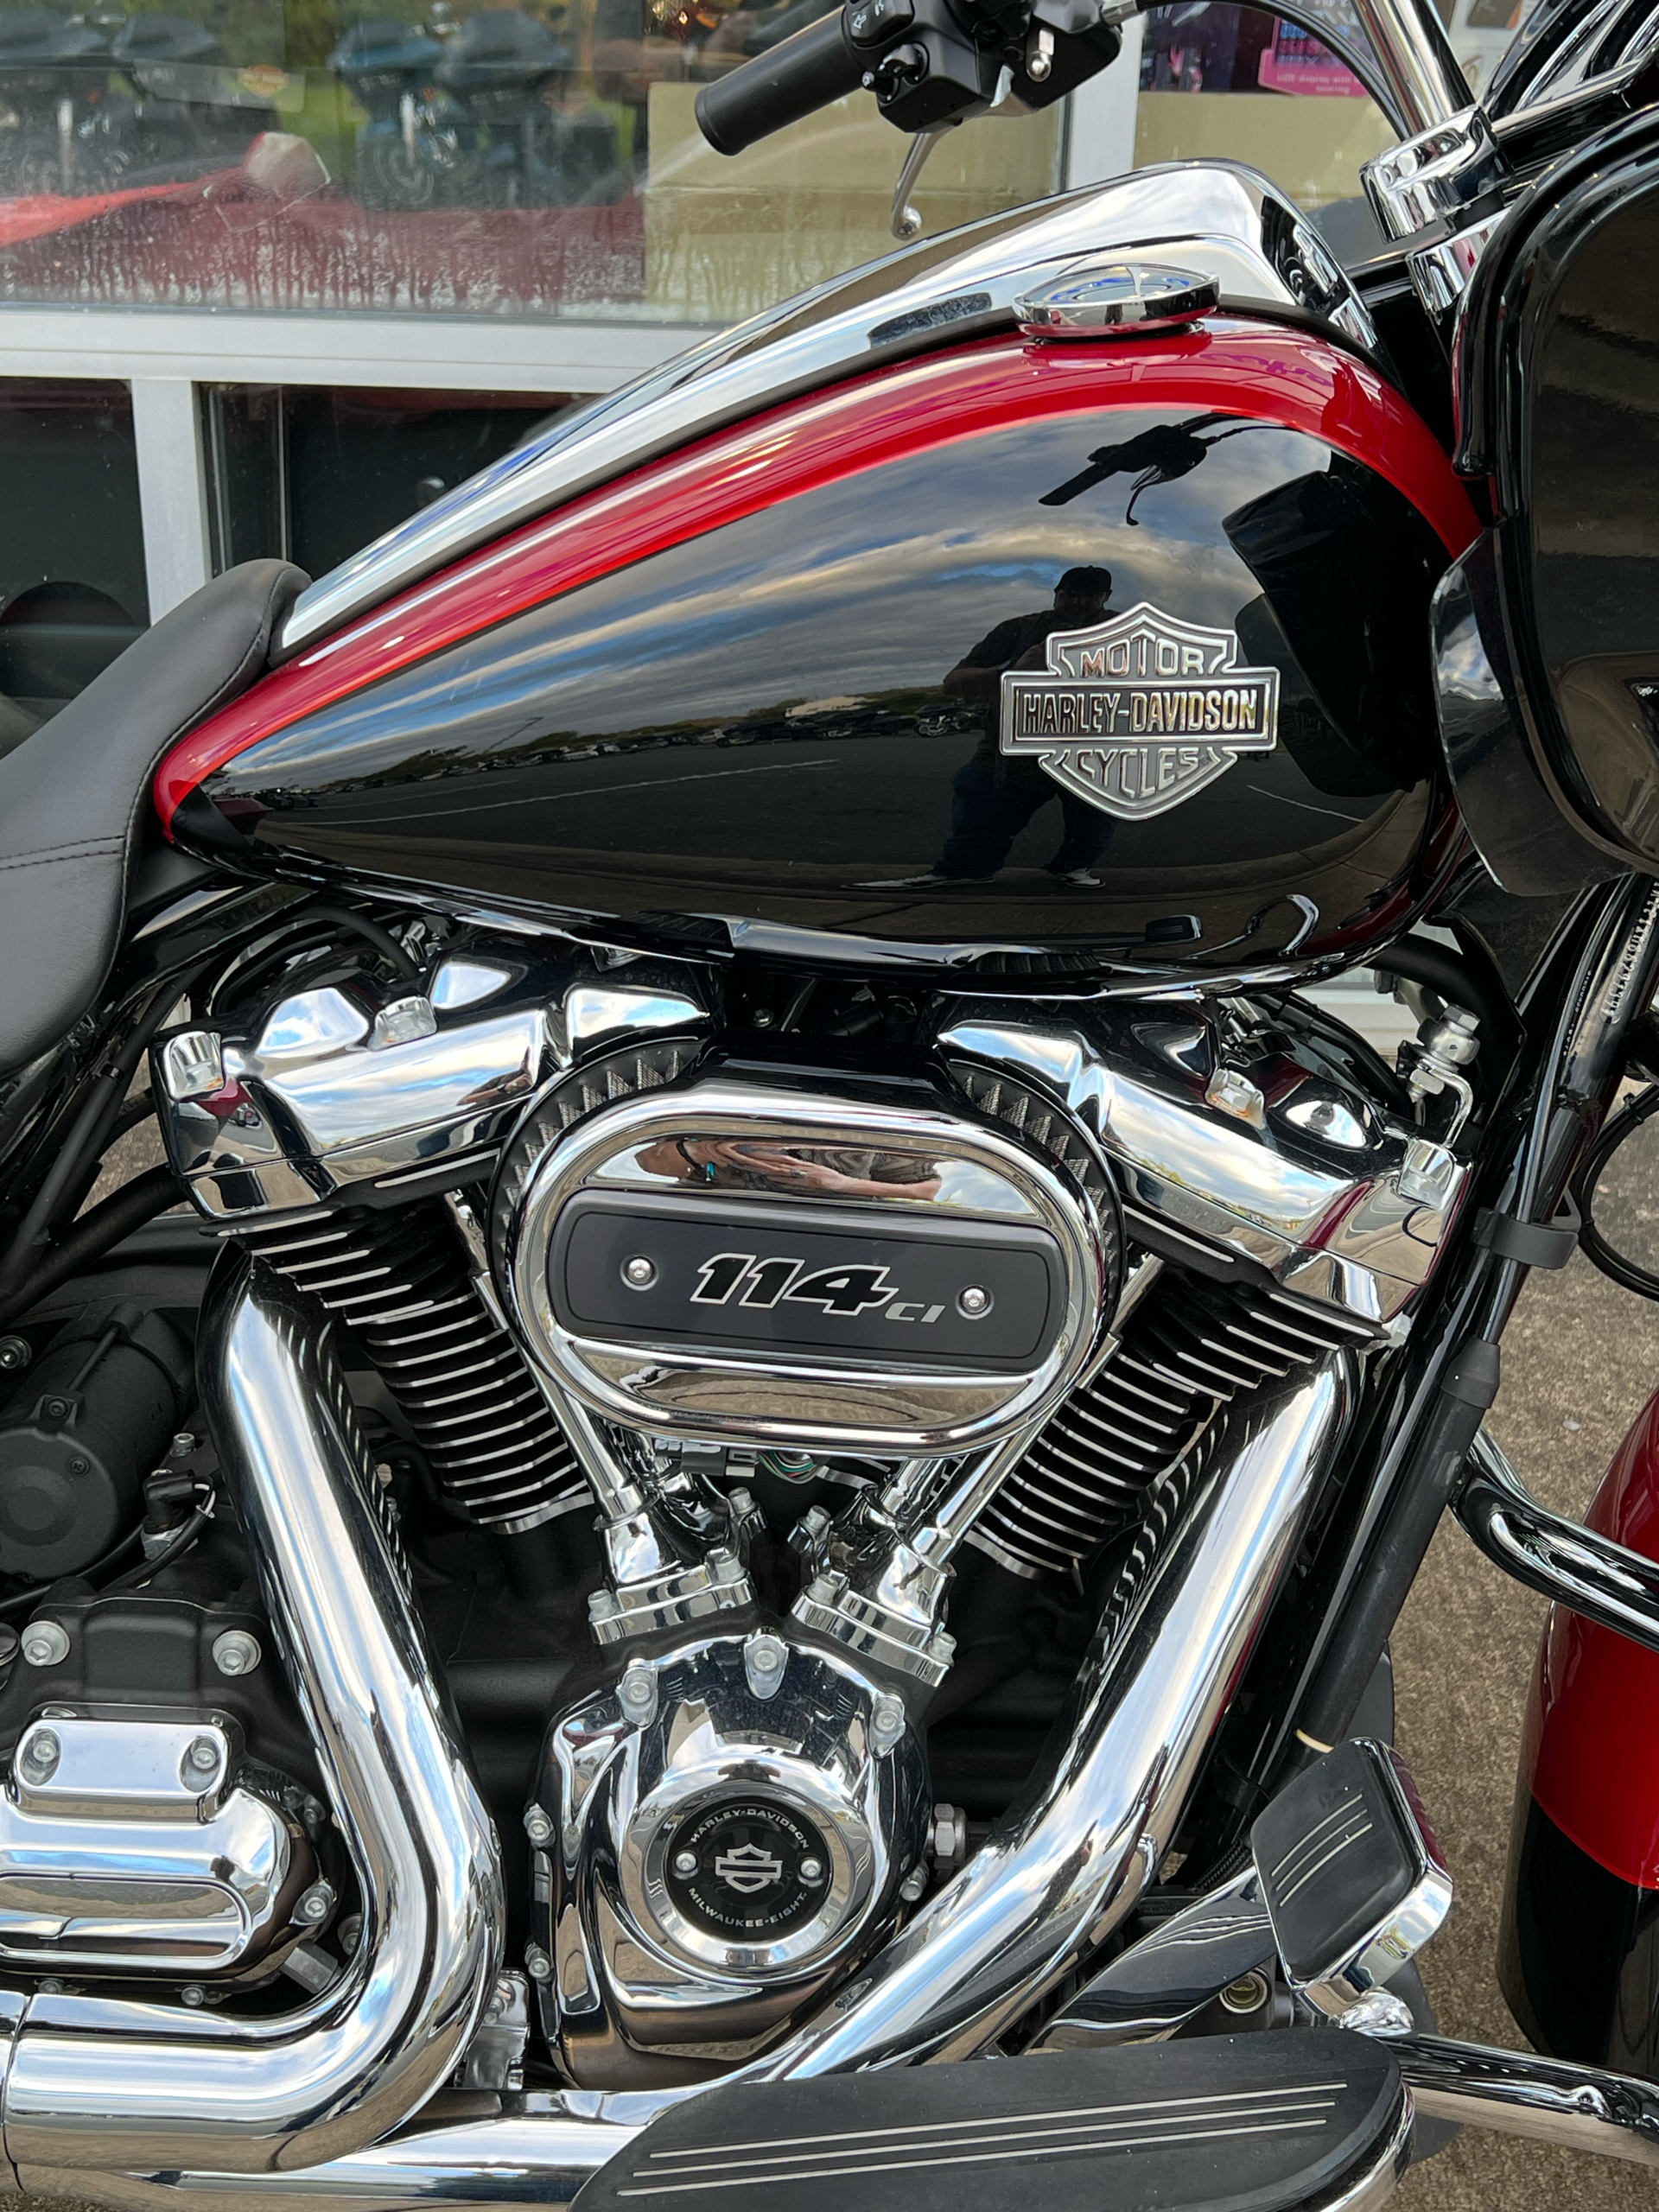 2021 Harley-Davidson Road Glide Special in Dumfries, Virginia - Photo 7